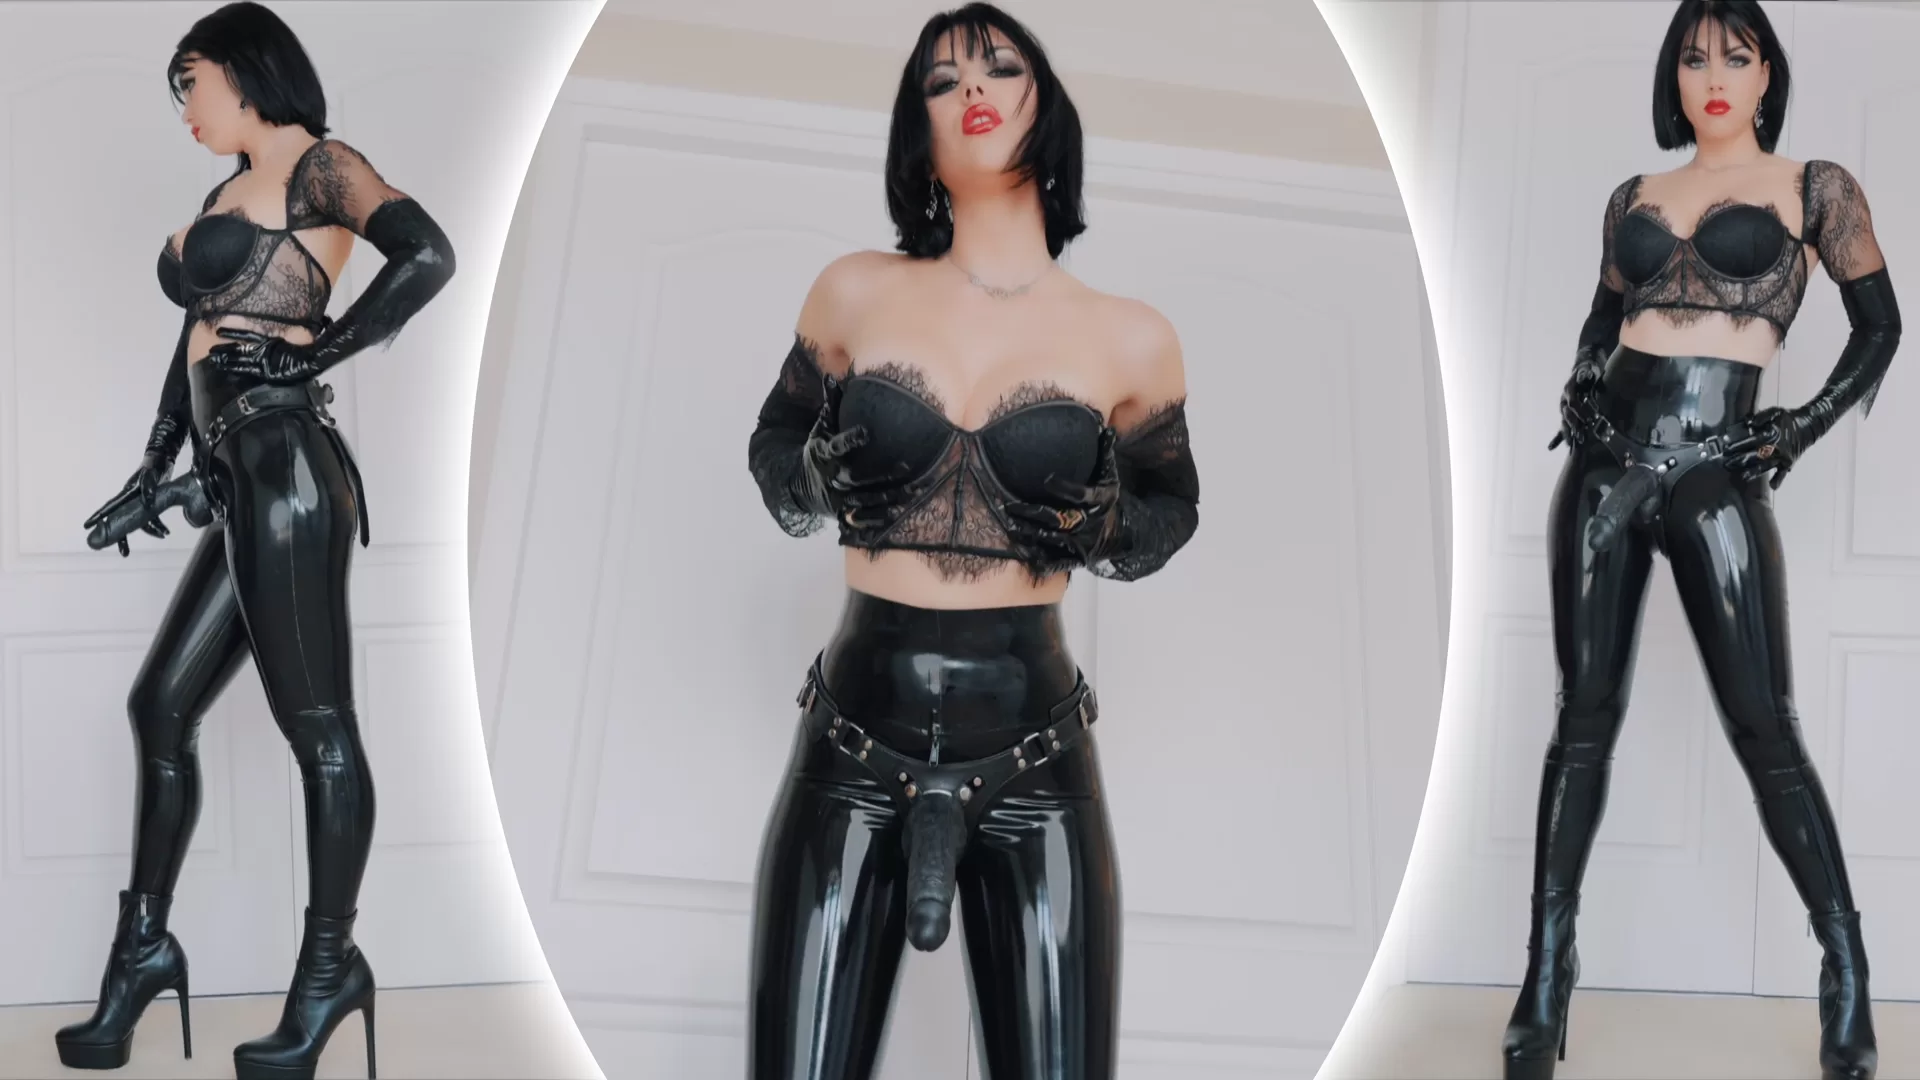 Blow your Mind - Strap-on Femdom POV Clips - Young Goddess Kim